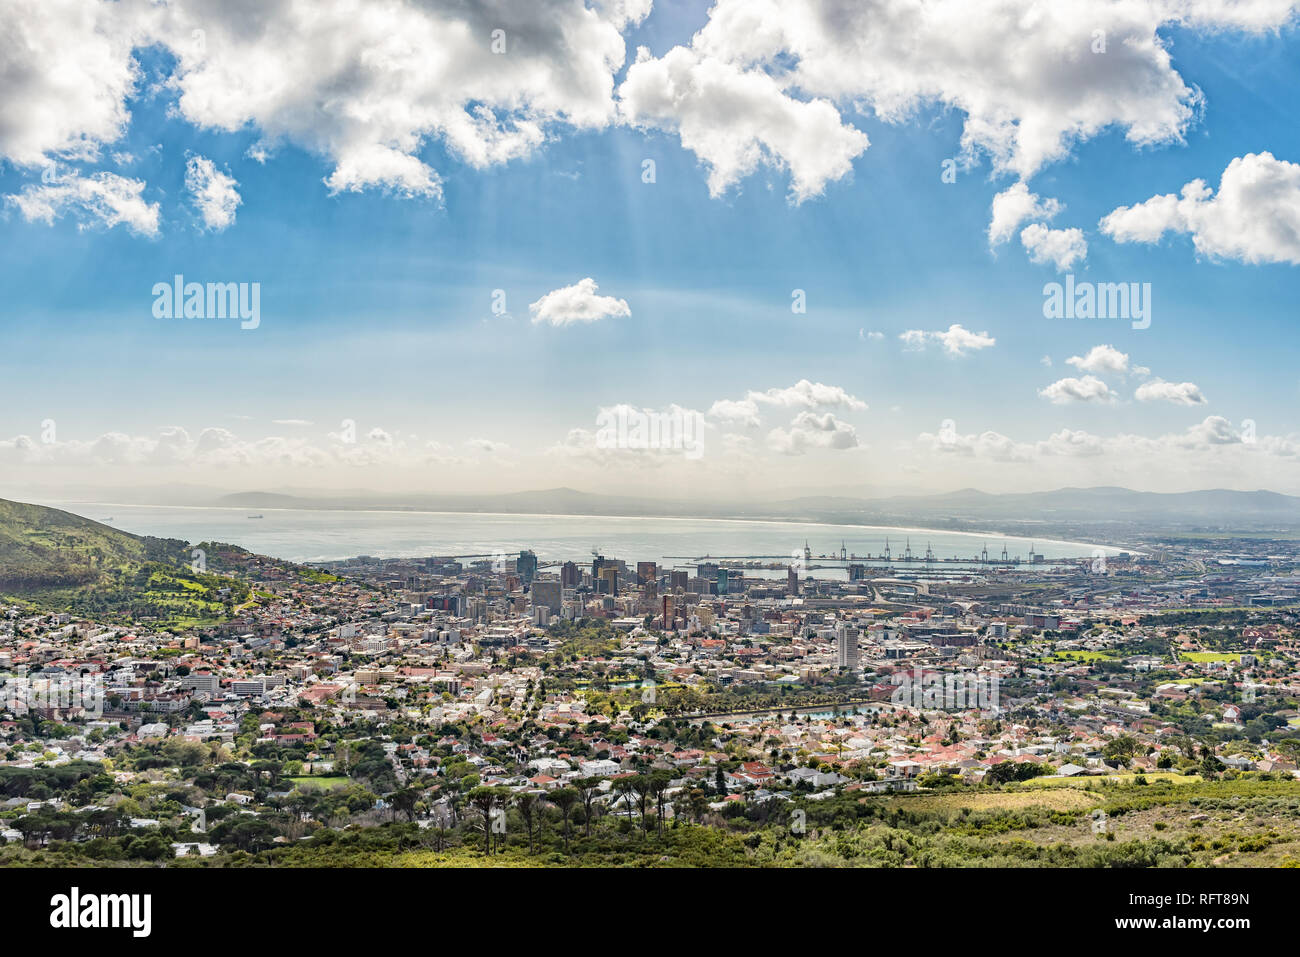 CAPE TOWN, SOUTH AFRICA, AUGUST 17, 2018: View of the central business district, harbor and residential areas of Cape Town as seen from the lower cabl Stock Photo